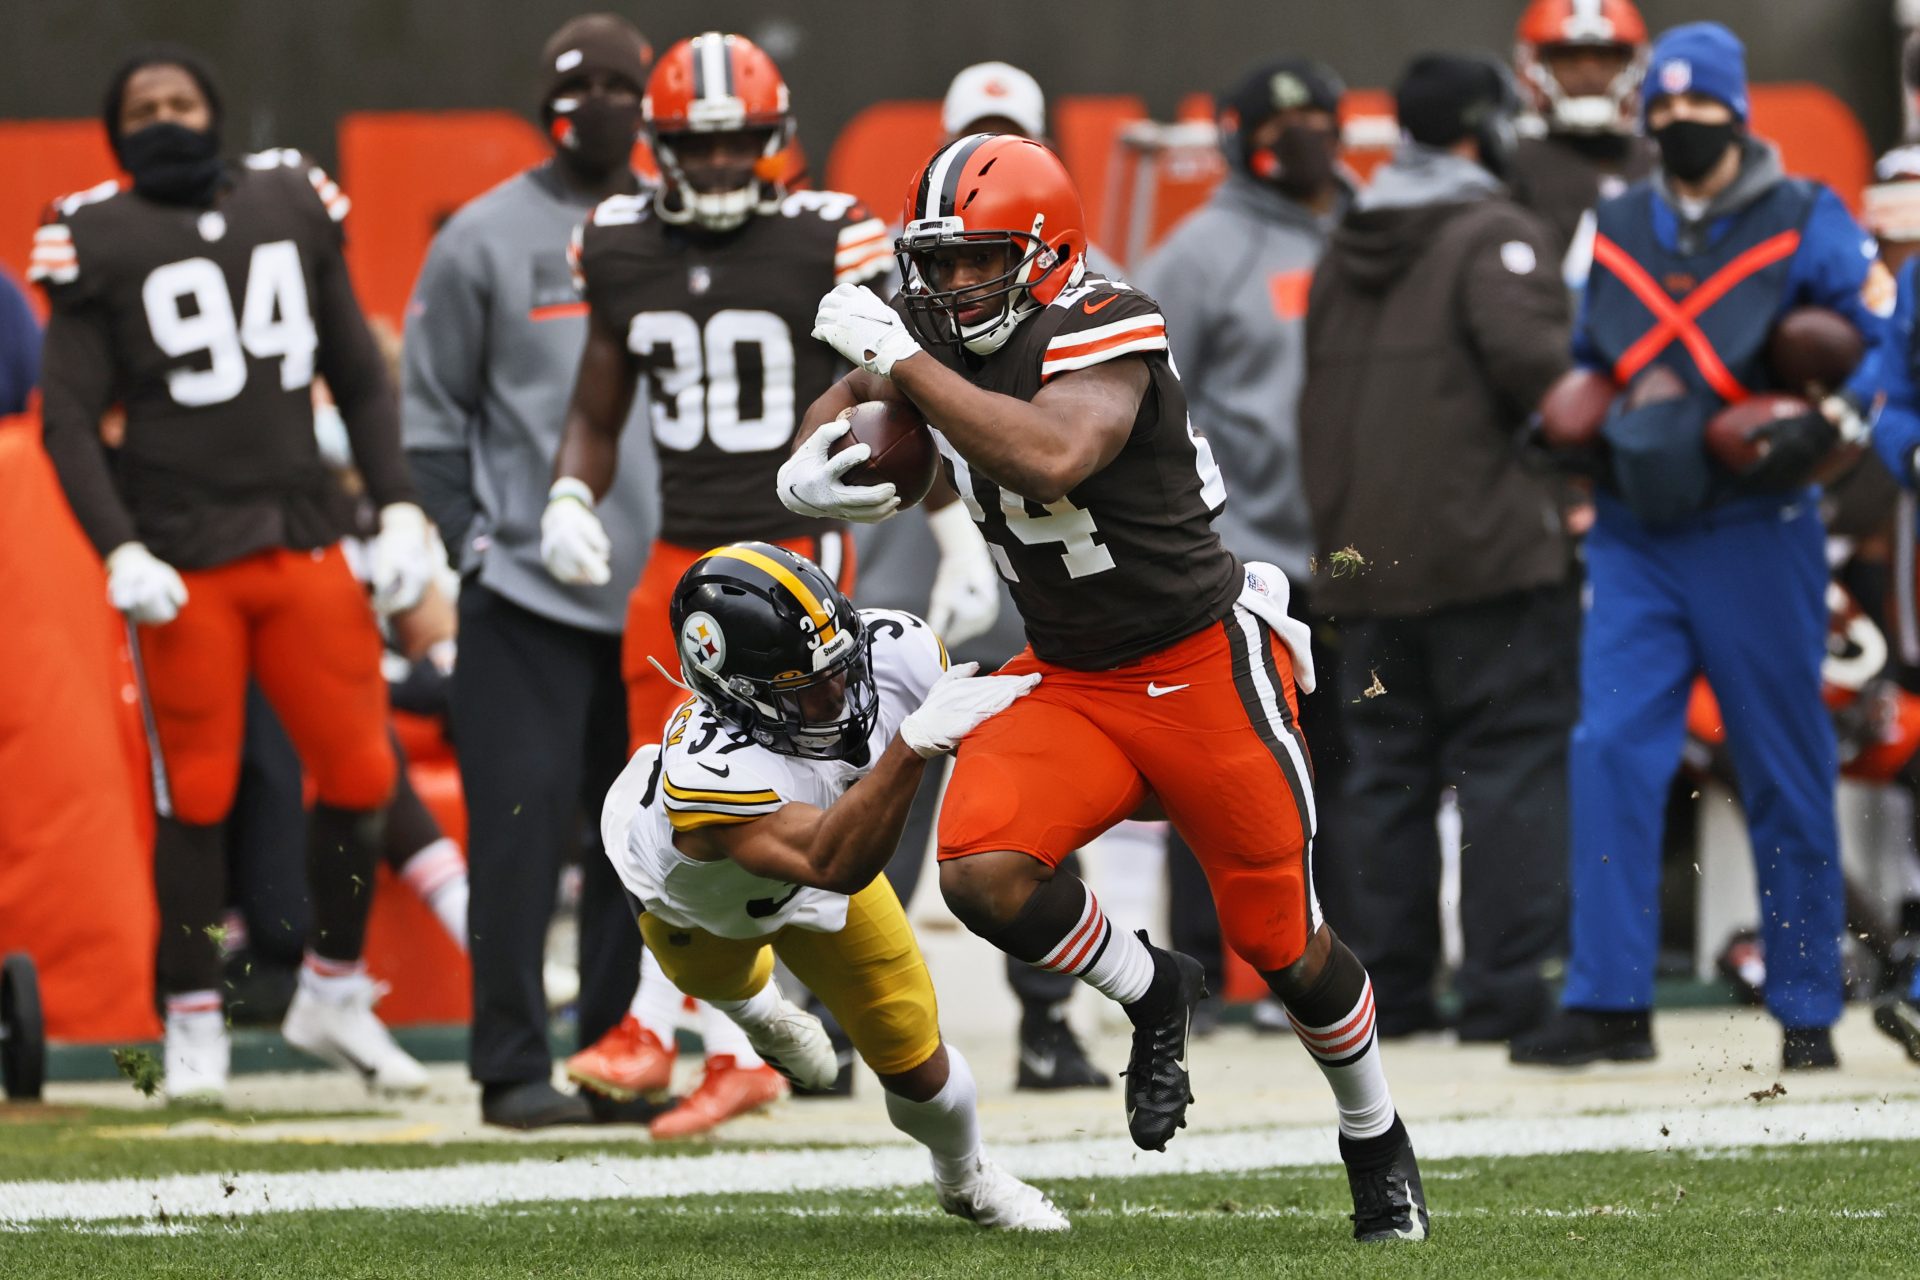 Cleveland Browns running back Nick Chubb (24) breaks a tackle from Pittsburgh Steelers free safety Minkah Fitzpatrick (39) for a 47-yard touchdown during the first half of an NFL football game, Sunday, Jan. 3, 2021, in Cleveland.